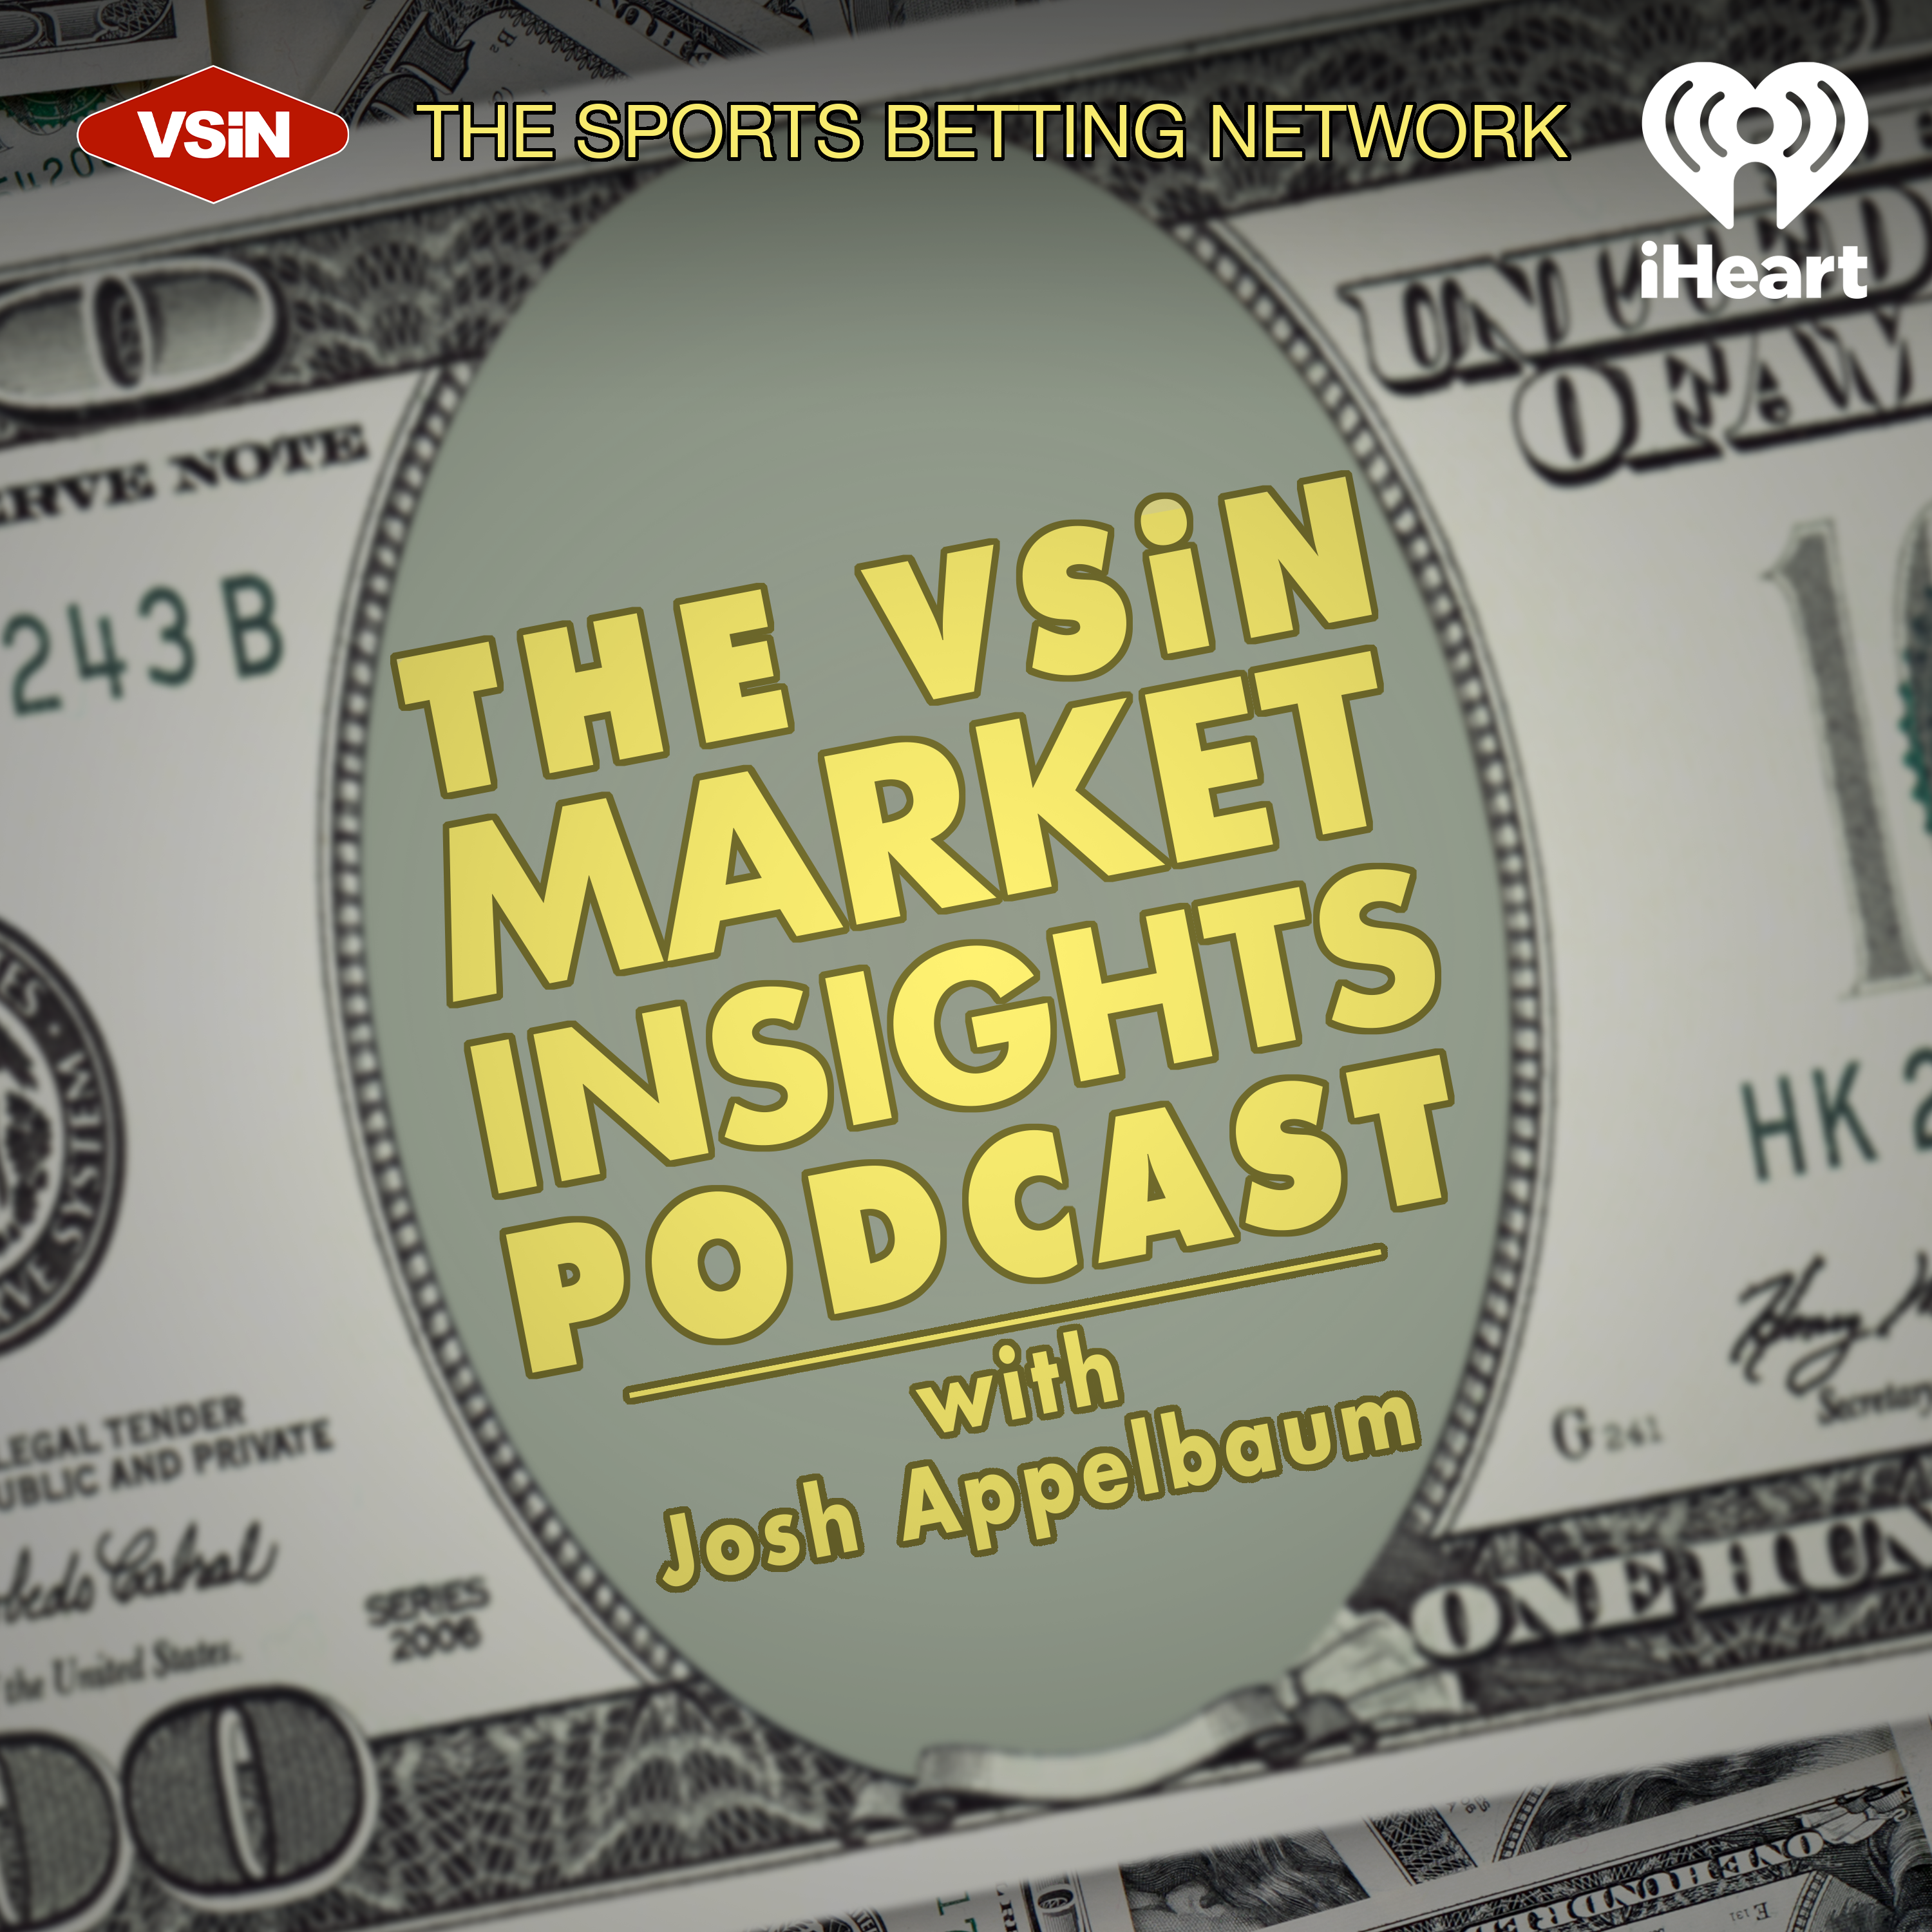 The VSiN Market Insights Podcast with Josh Appelbaum | February 16, 2022